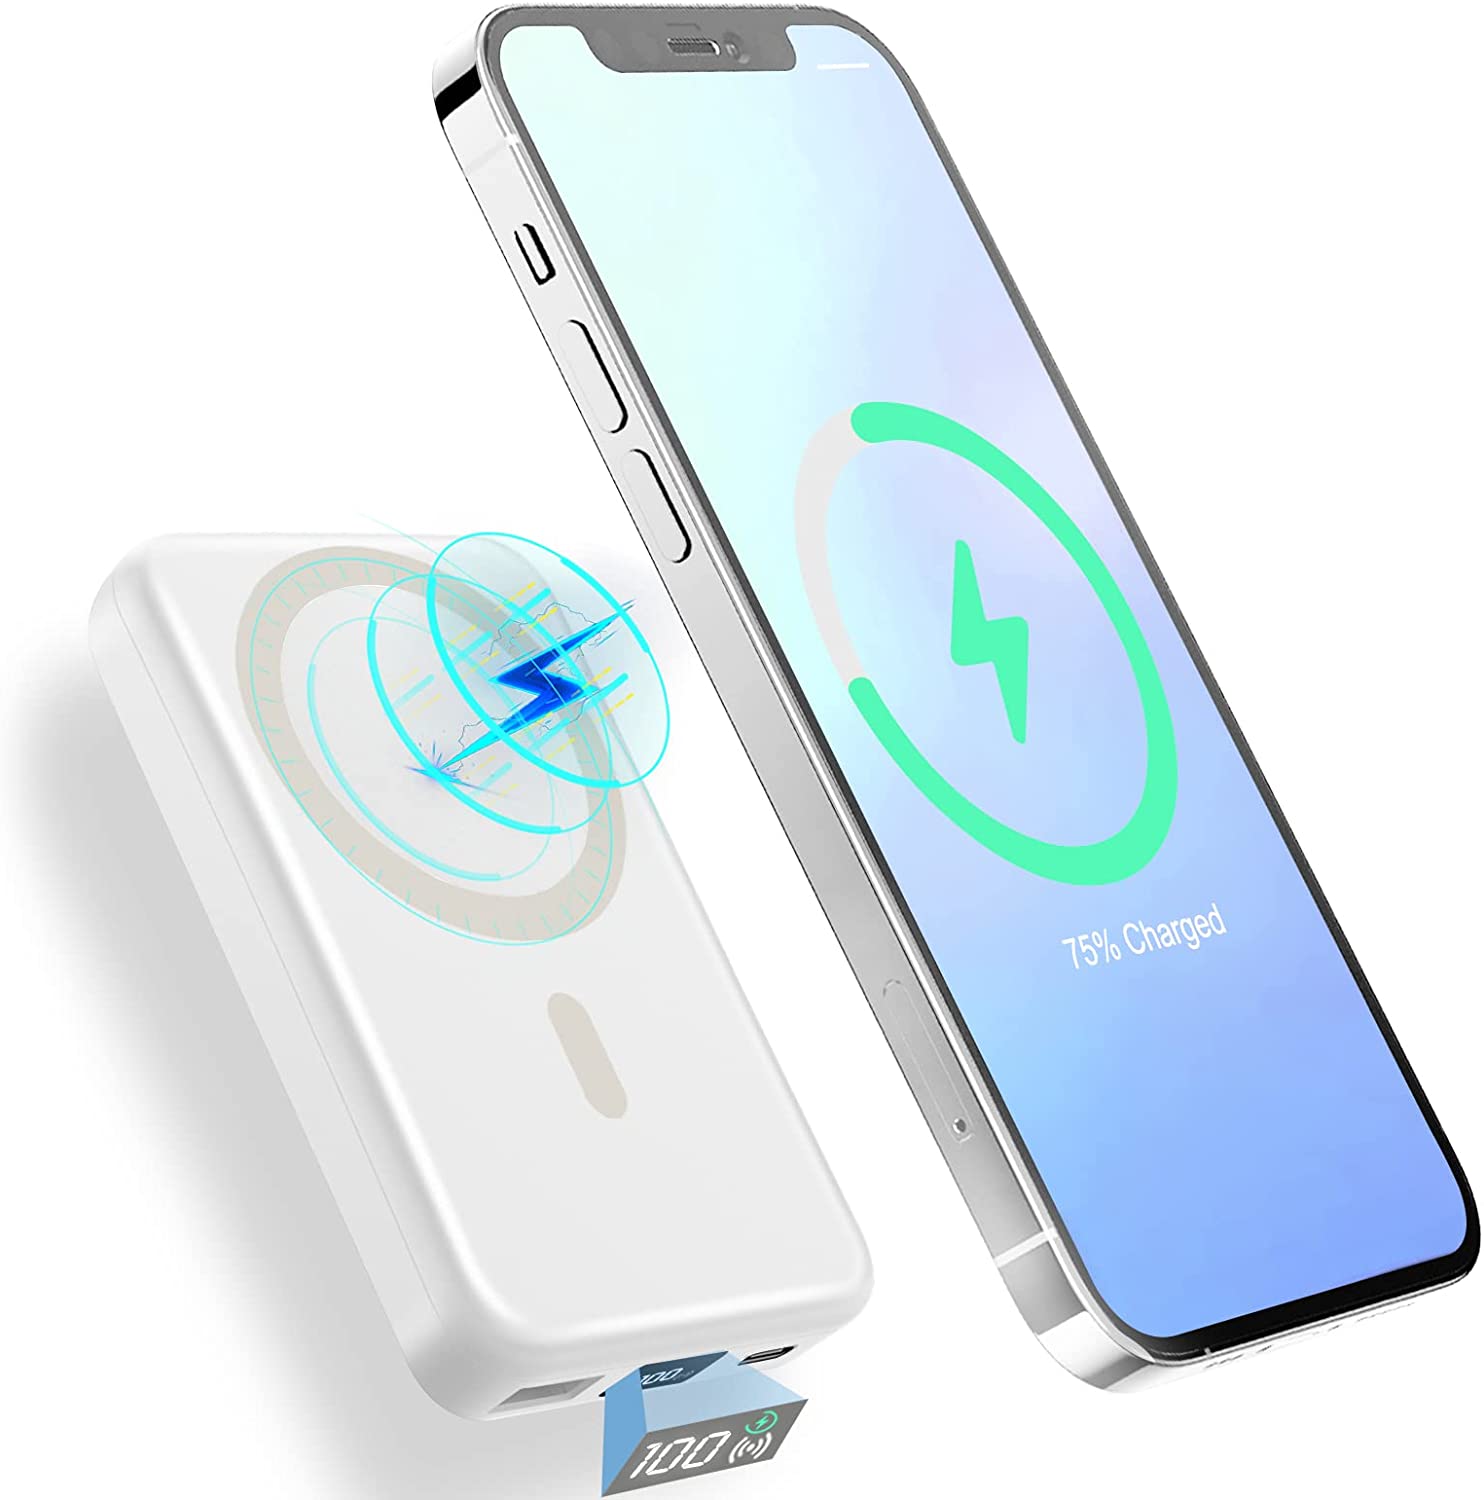 UGREEN refreshes Magnetic Power Banks with new silicone casing -   News